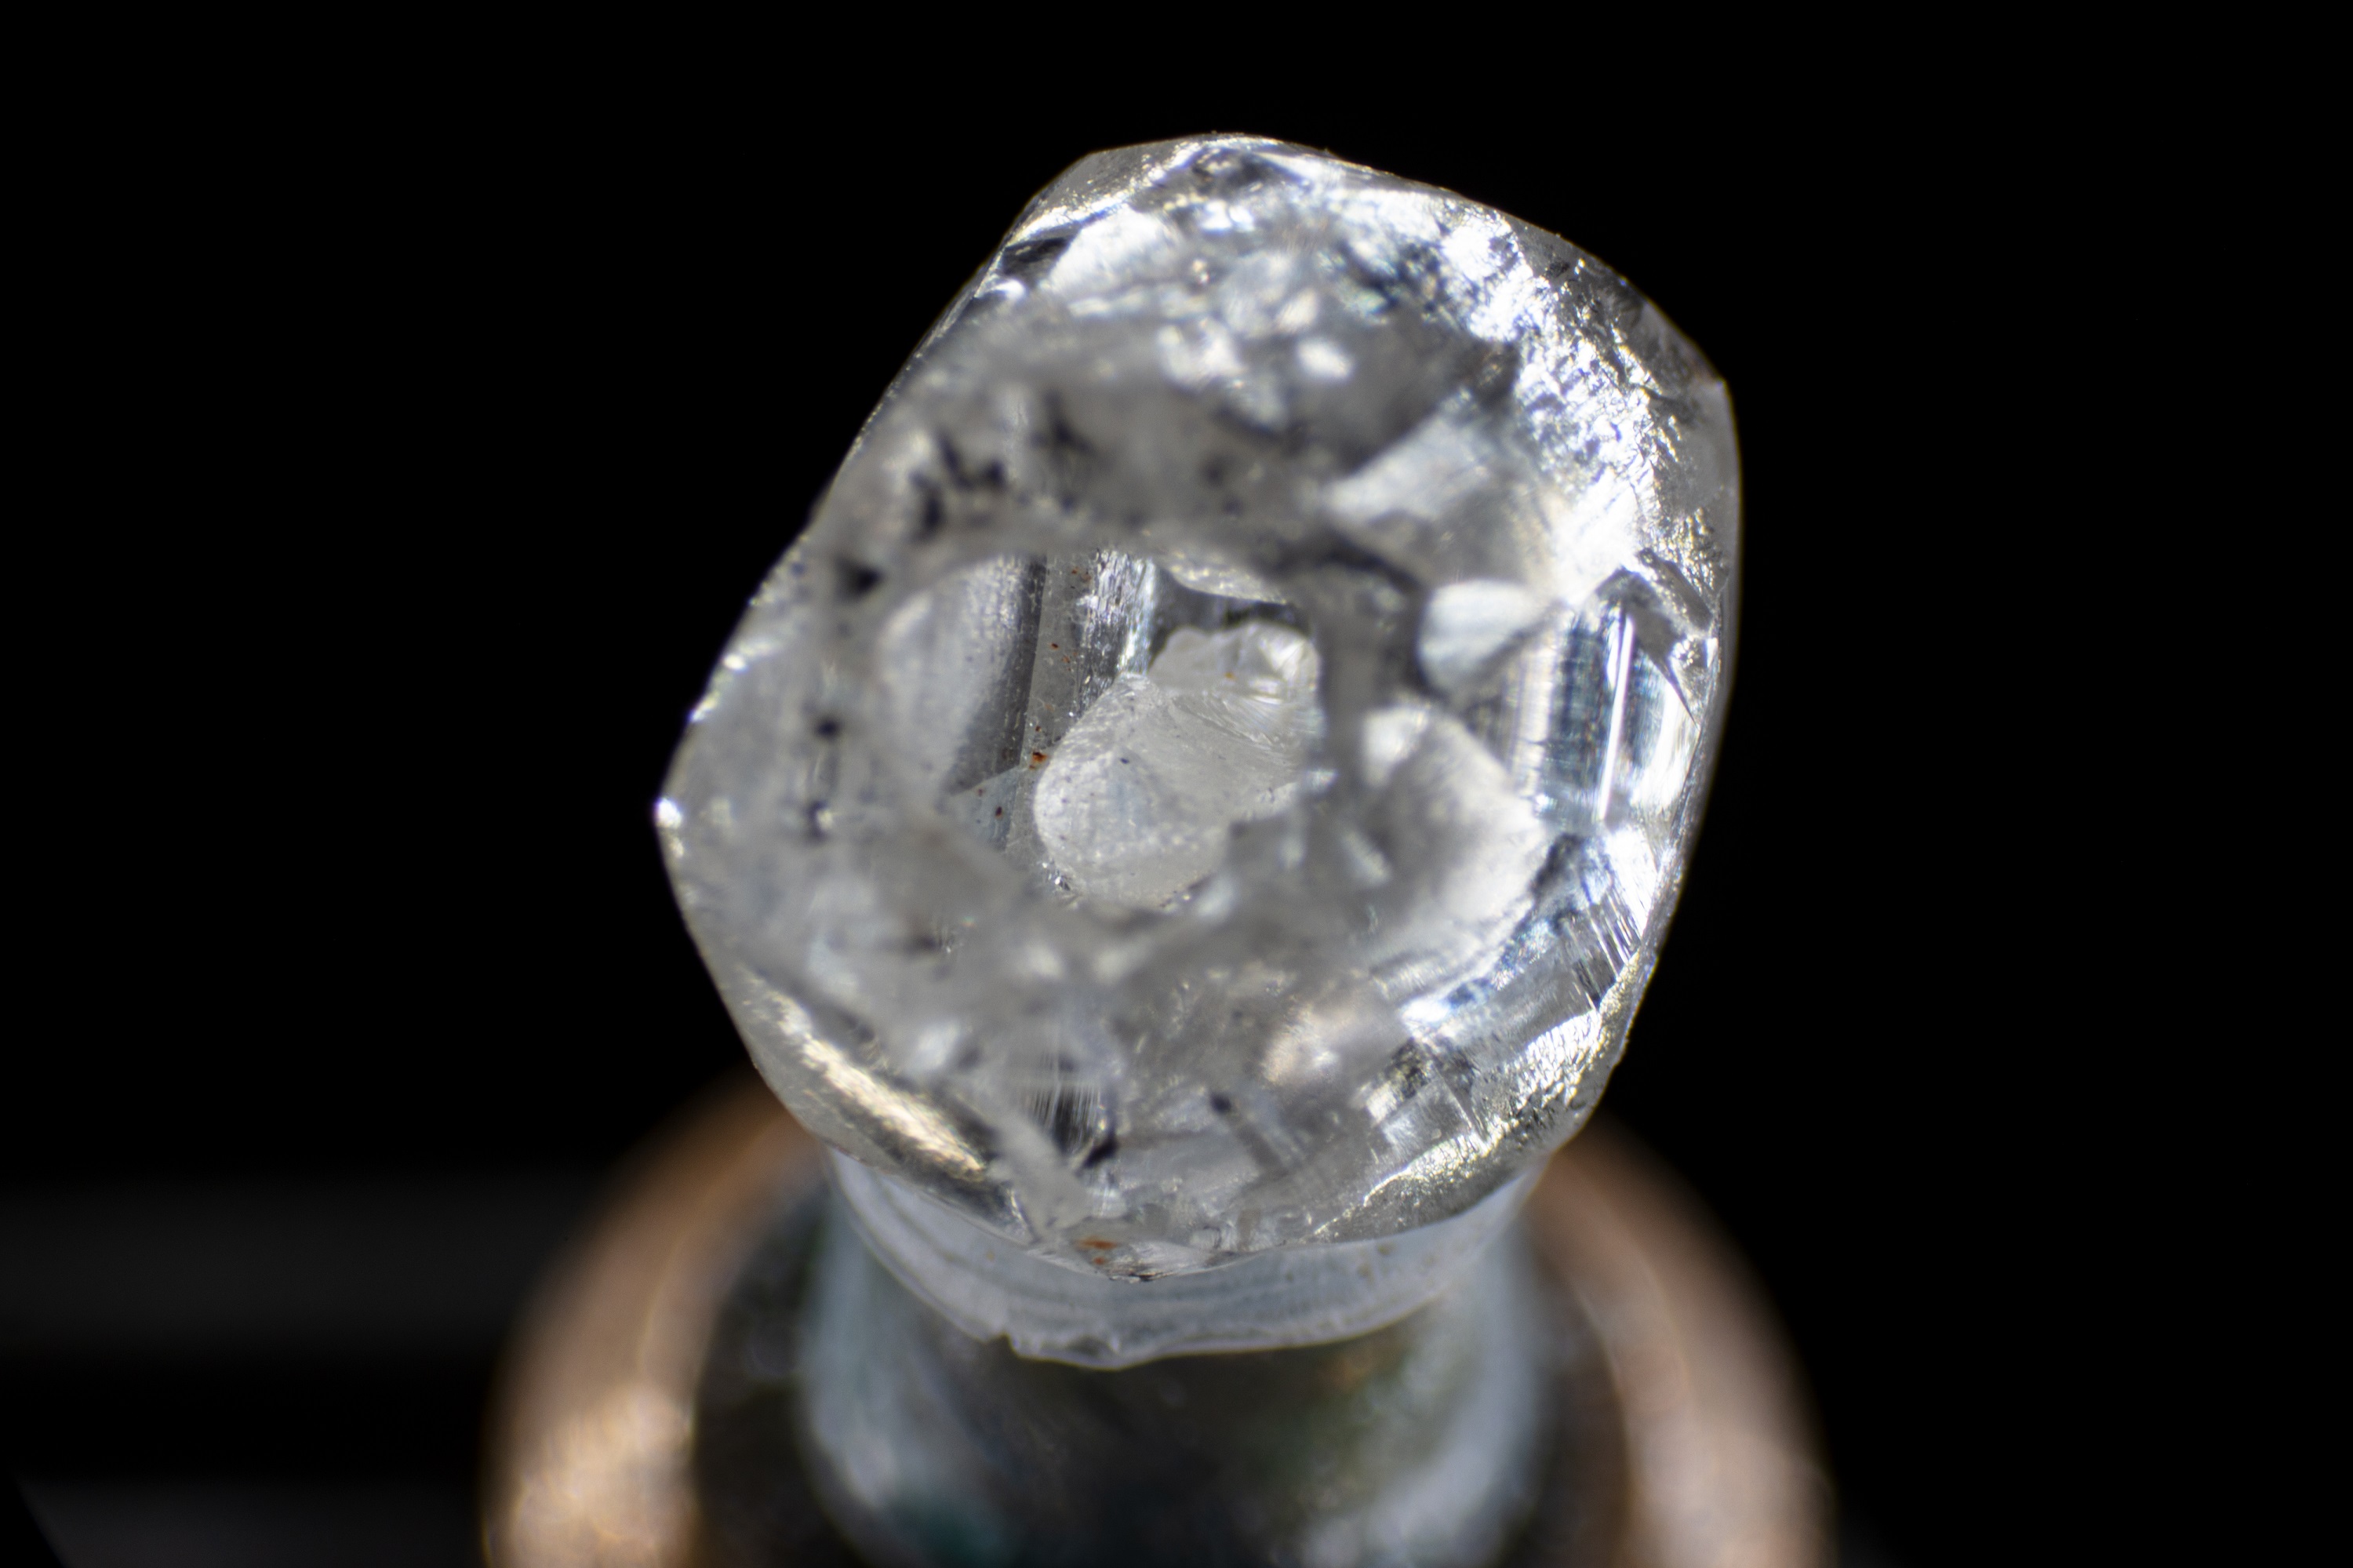 Optical image showing a small diamond crystal nestled in the cavity of a 0.329ct rough diamond. Photo by Danny Bowler